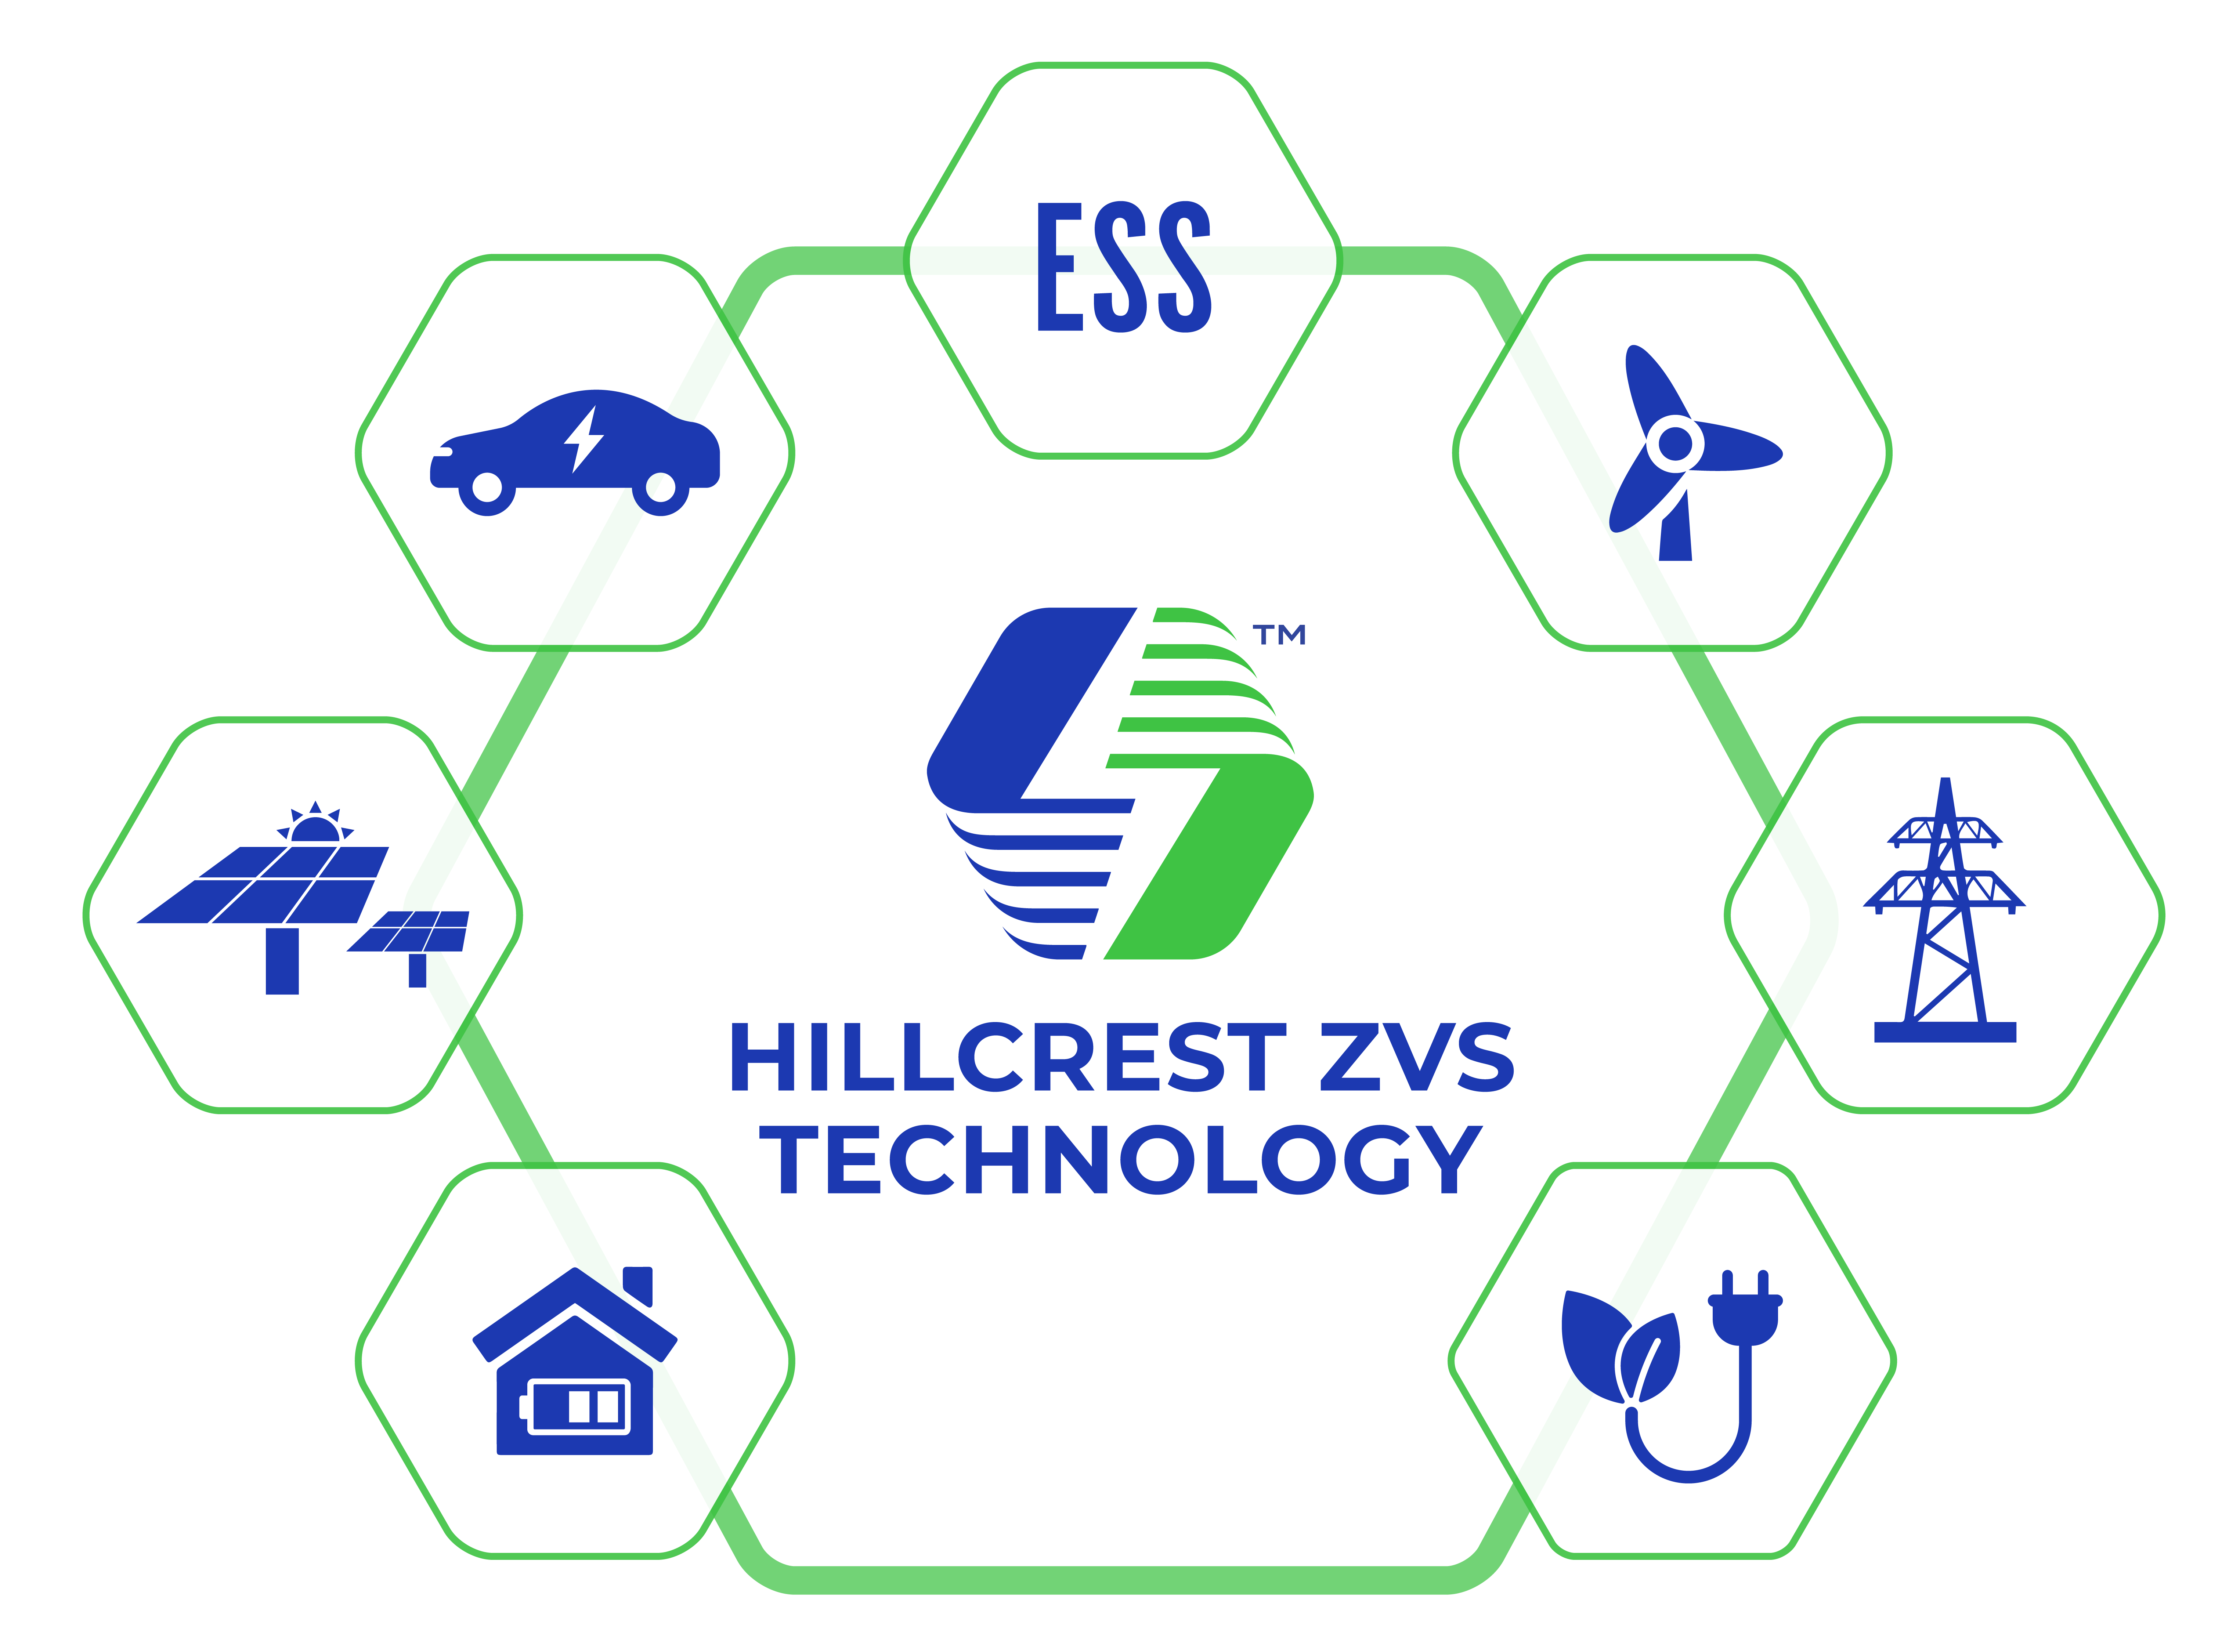 Hillcrest ZVS technology and the different applications